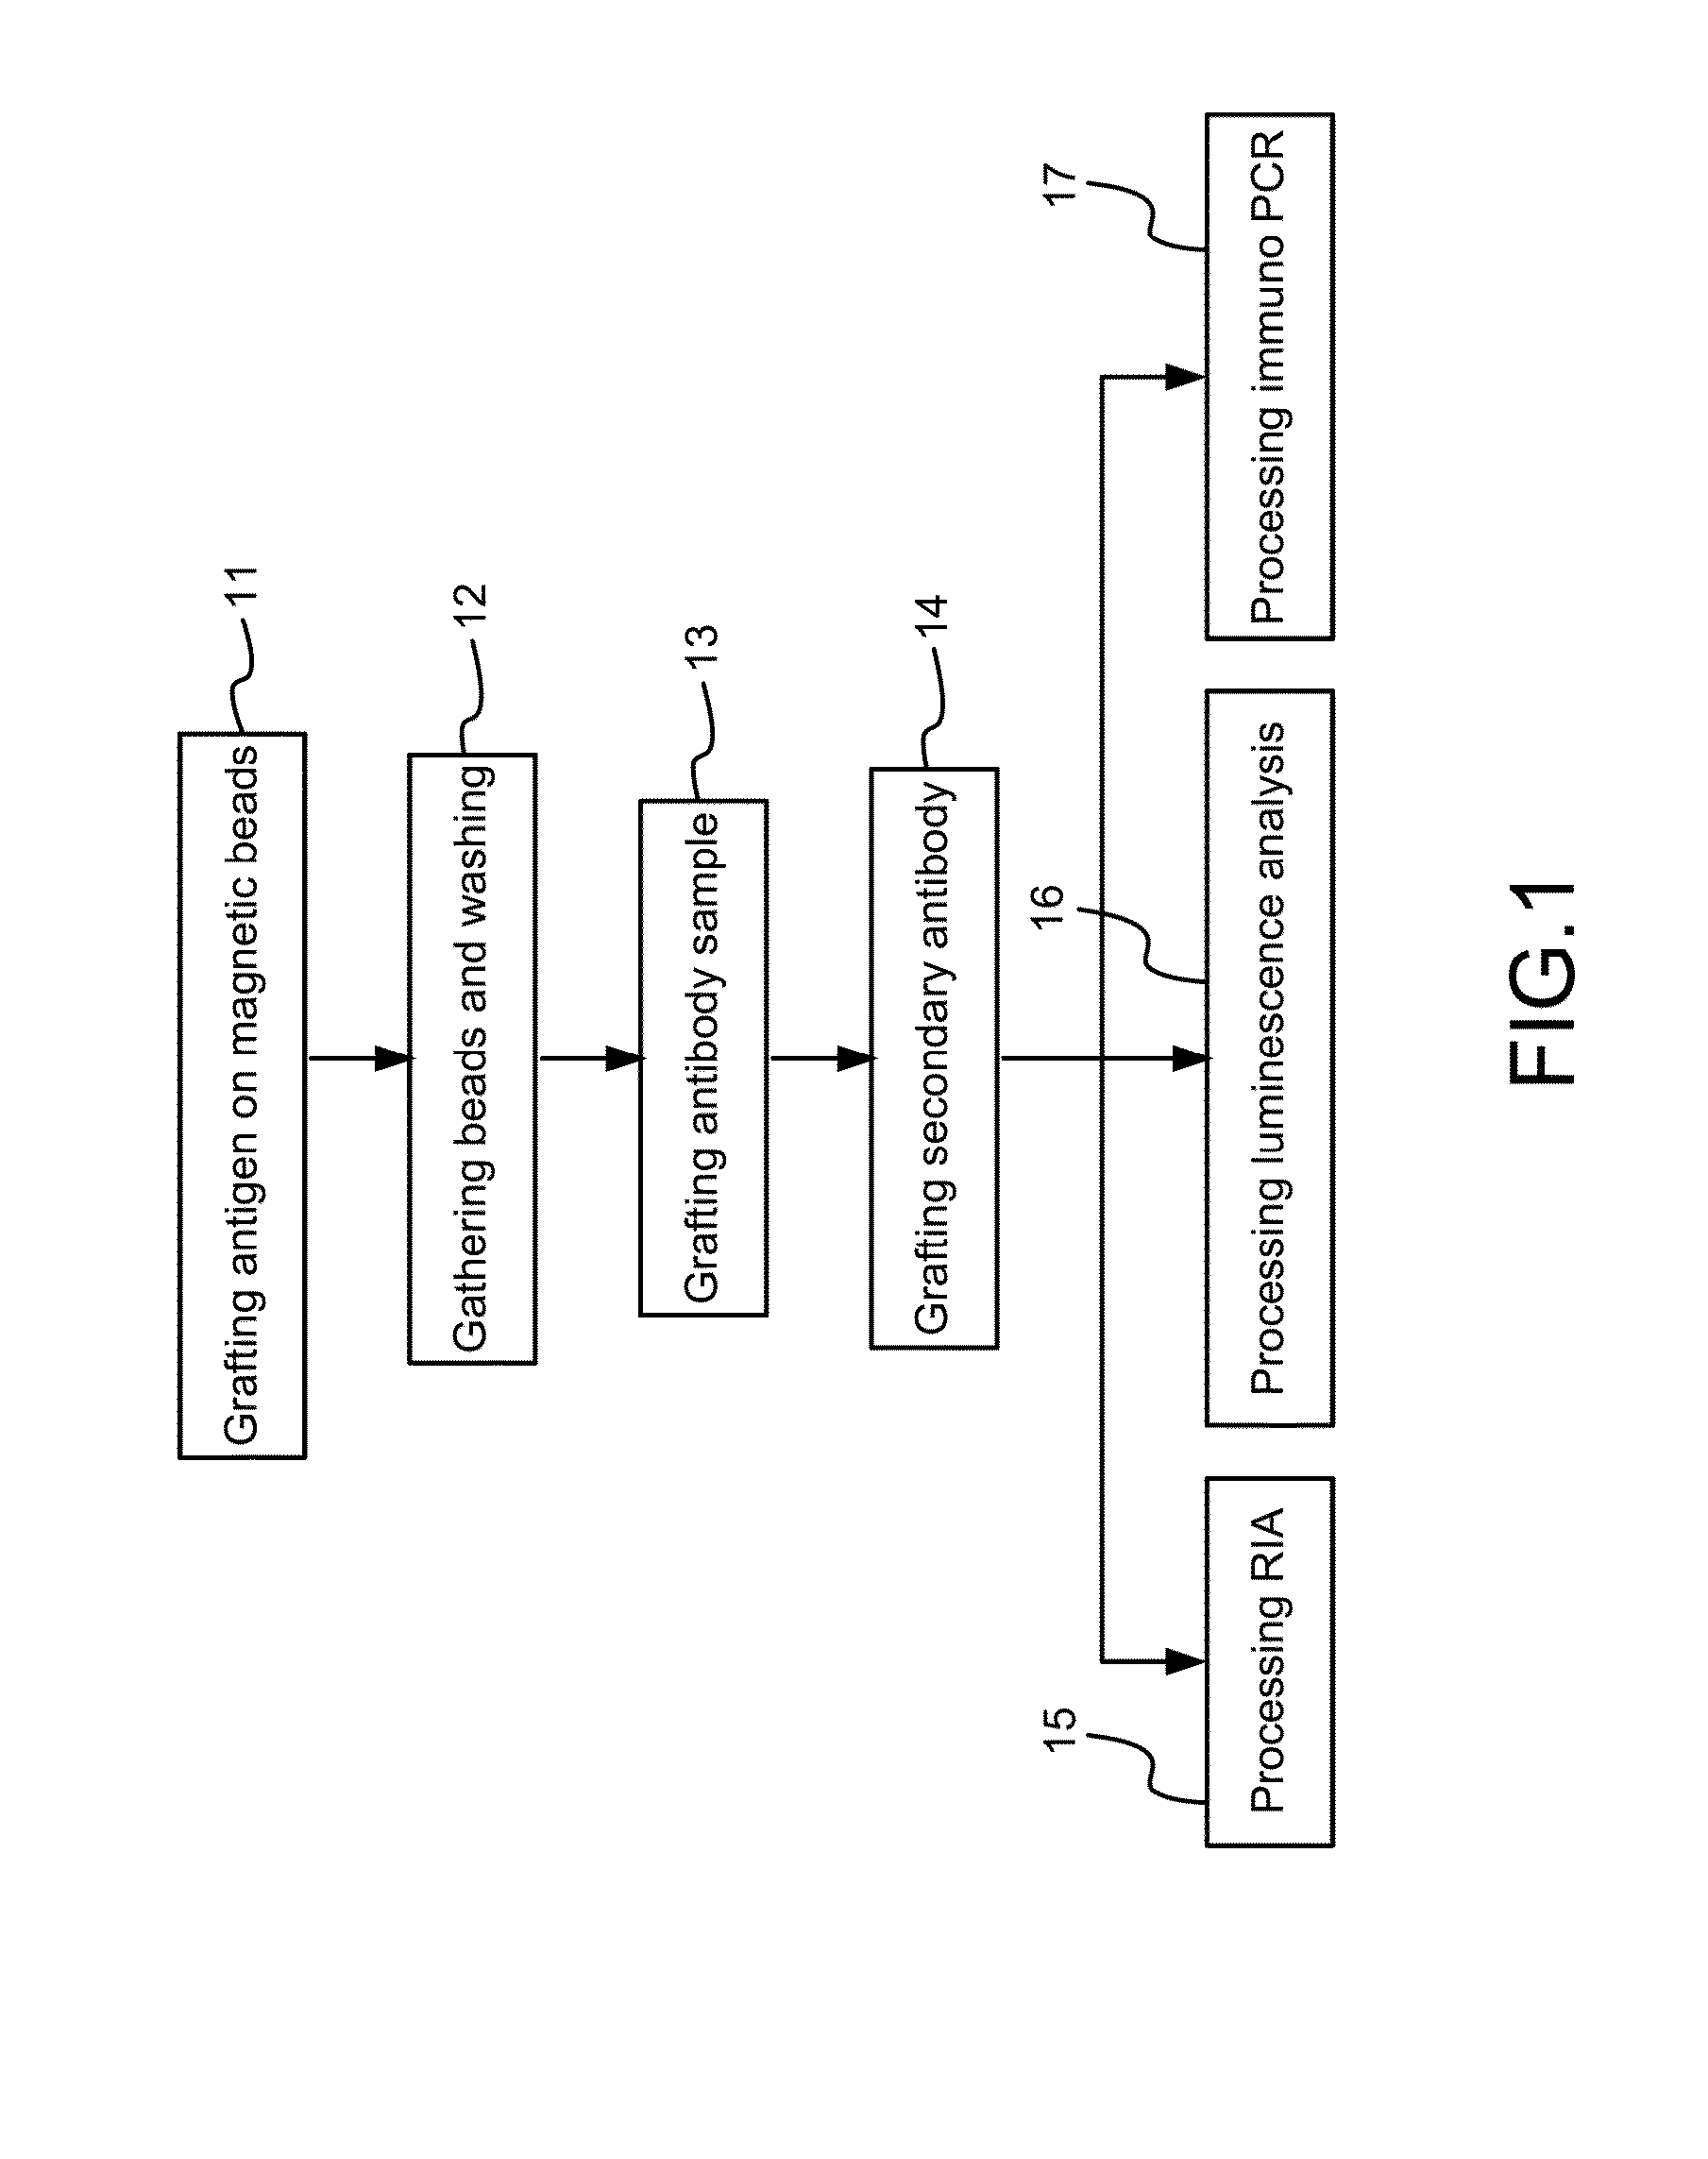 Method of Detection Using Nano Carbon Carrier Modified by Ionizing Radiation